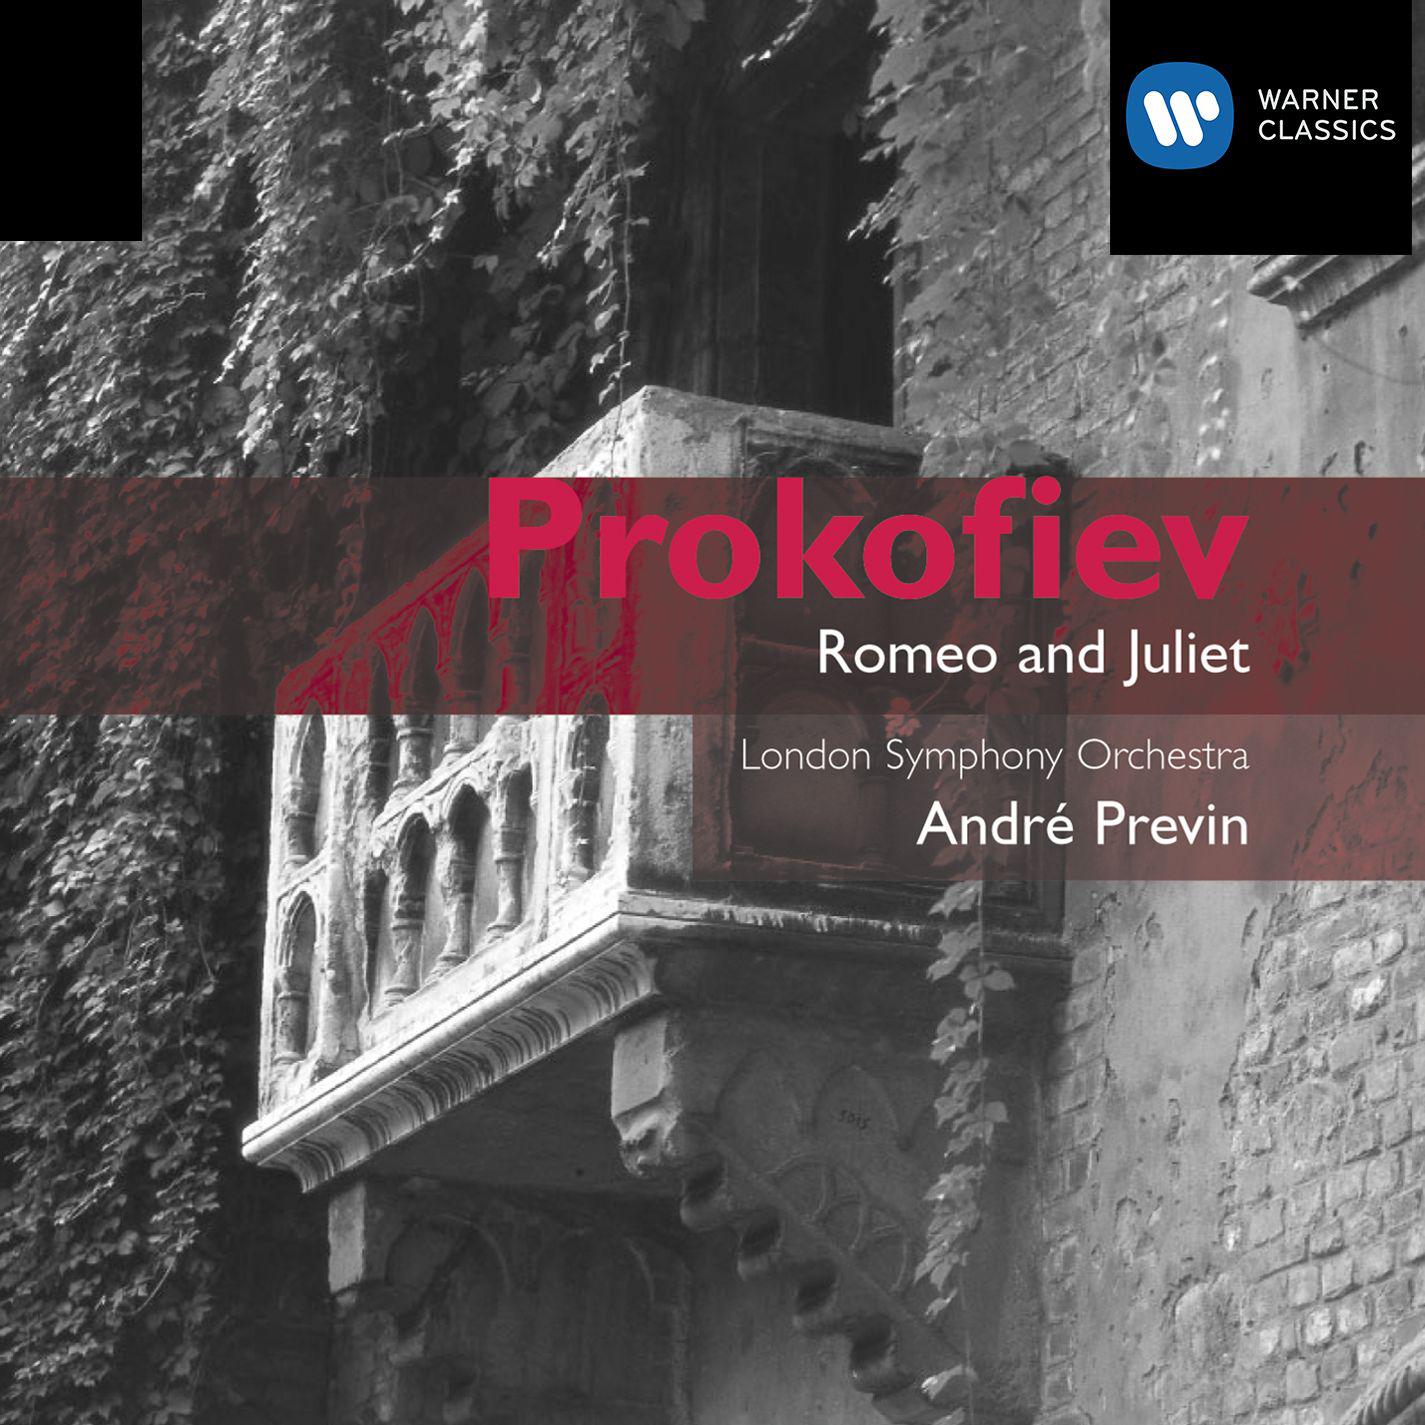 Romeo and Juliet (Complete Ballet), Op. 64, Act 1:No. 9, Preparing for the Ball (Juliet and the Nurse)